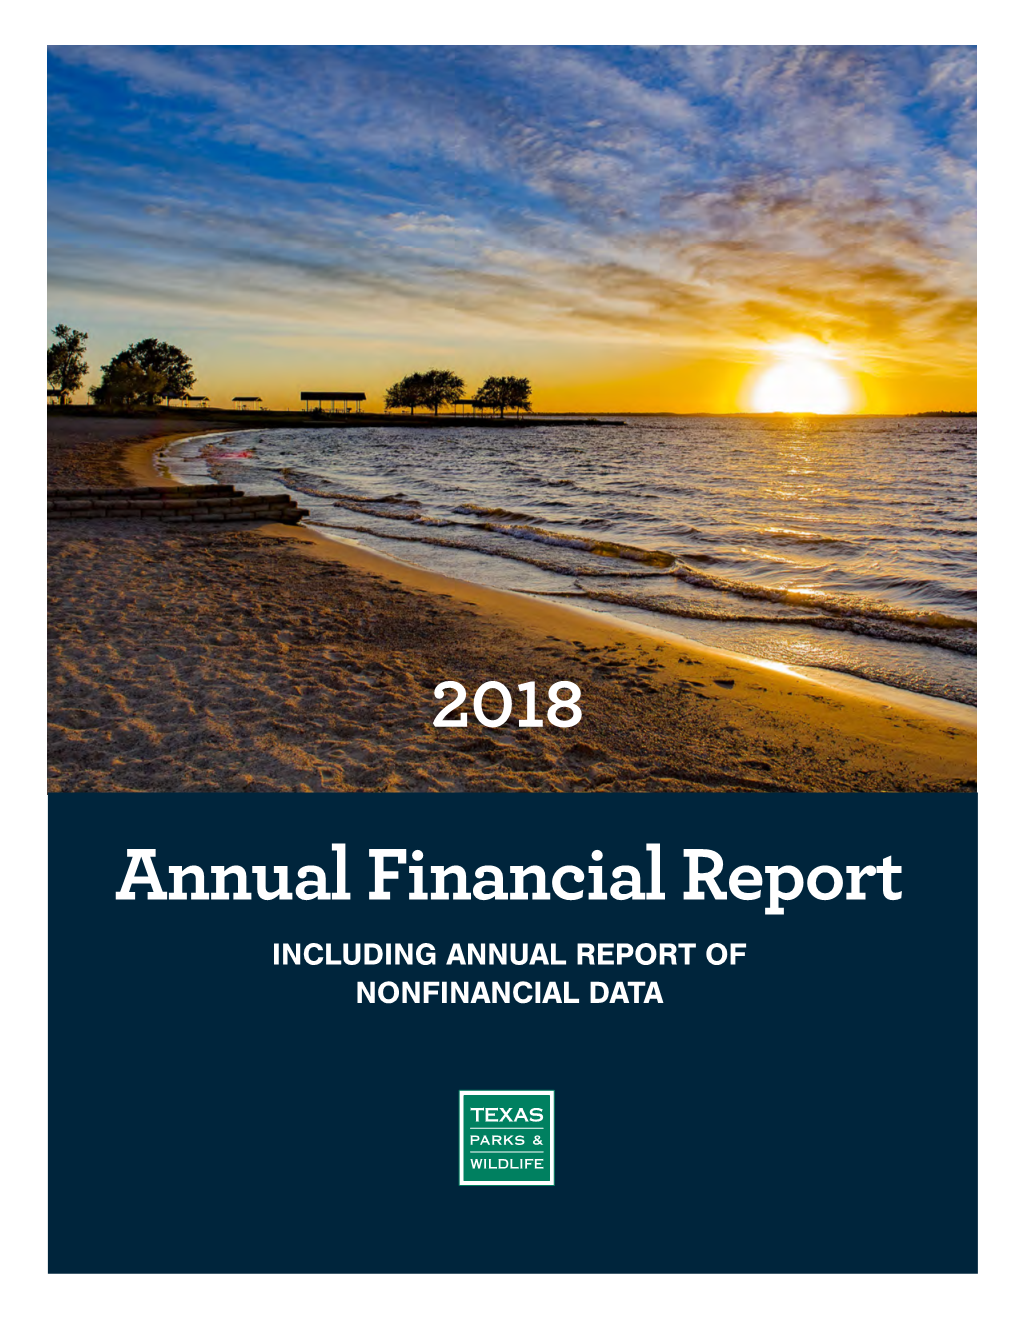 Annual Financial Report INCLUDING ANNUAL REPORT of NONFINANCIAL DATA Texas Parks and Wildlife Department Annual Financial Report